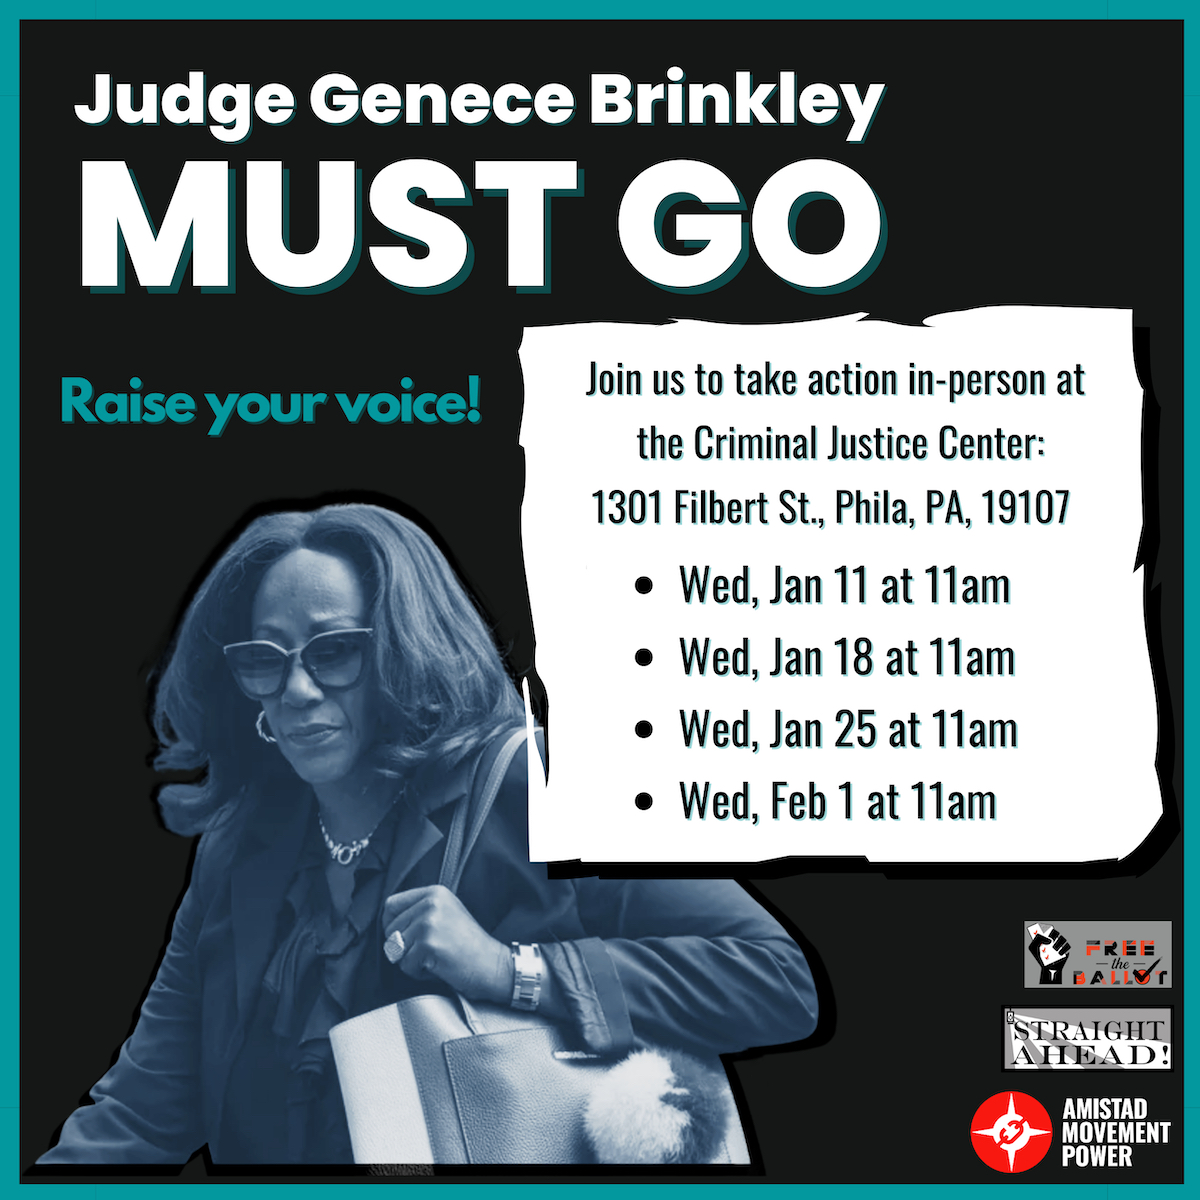 Flyer shows times when rallies will be held to demand Judge Brinkley's resignation whiich is also in text of blog post